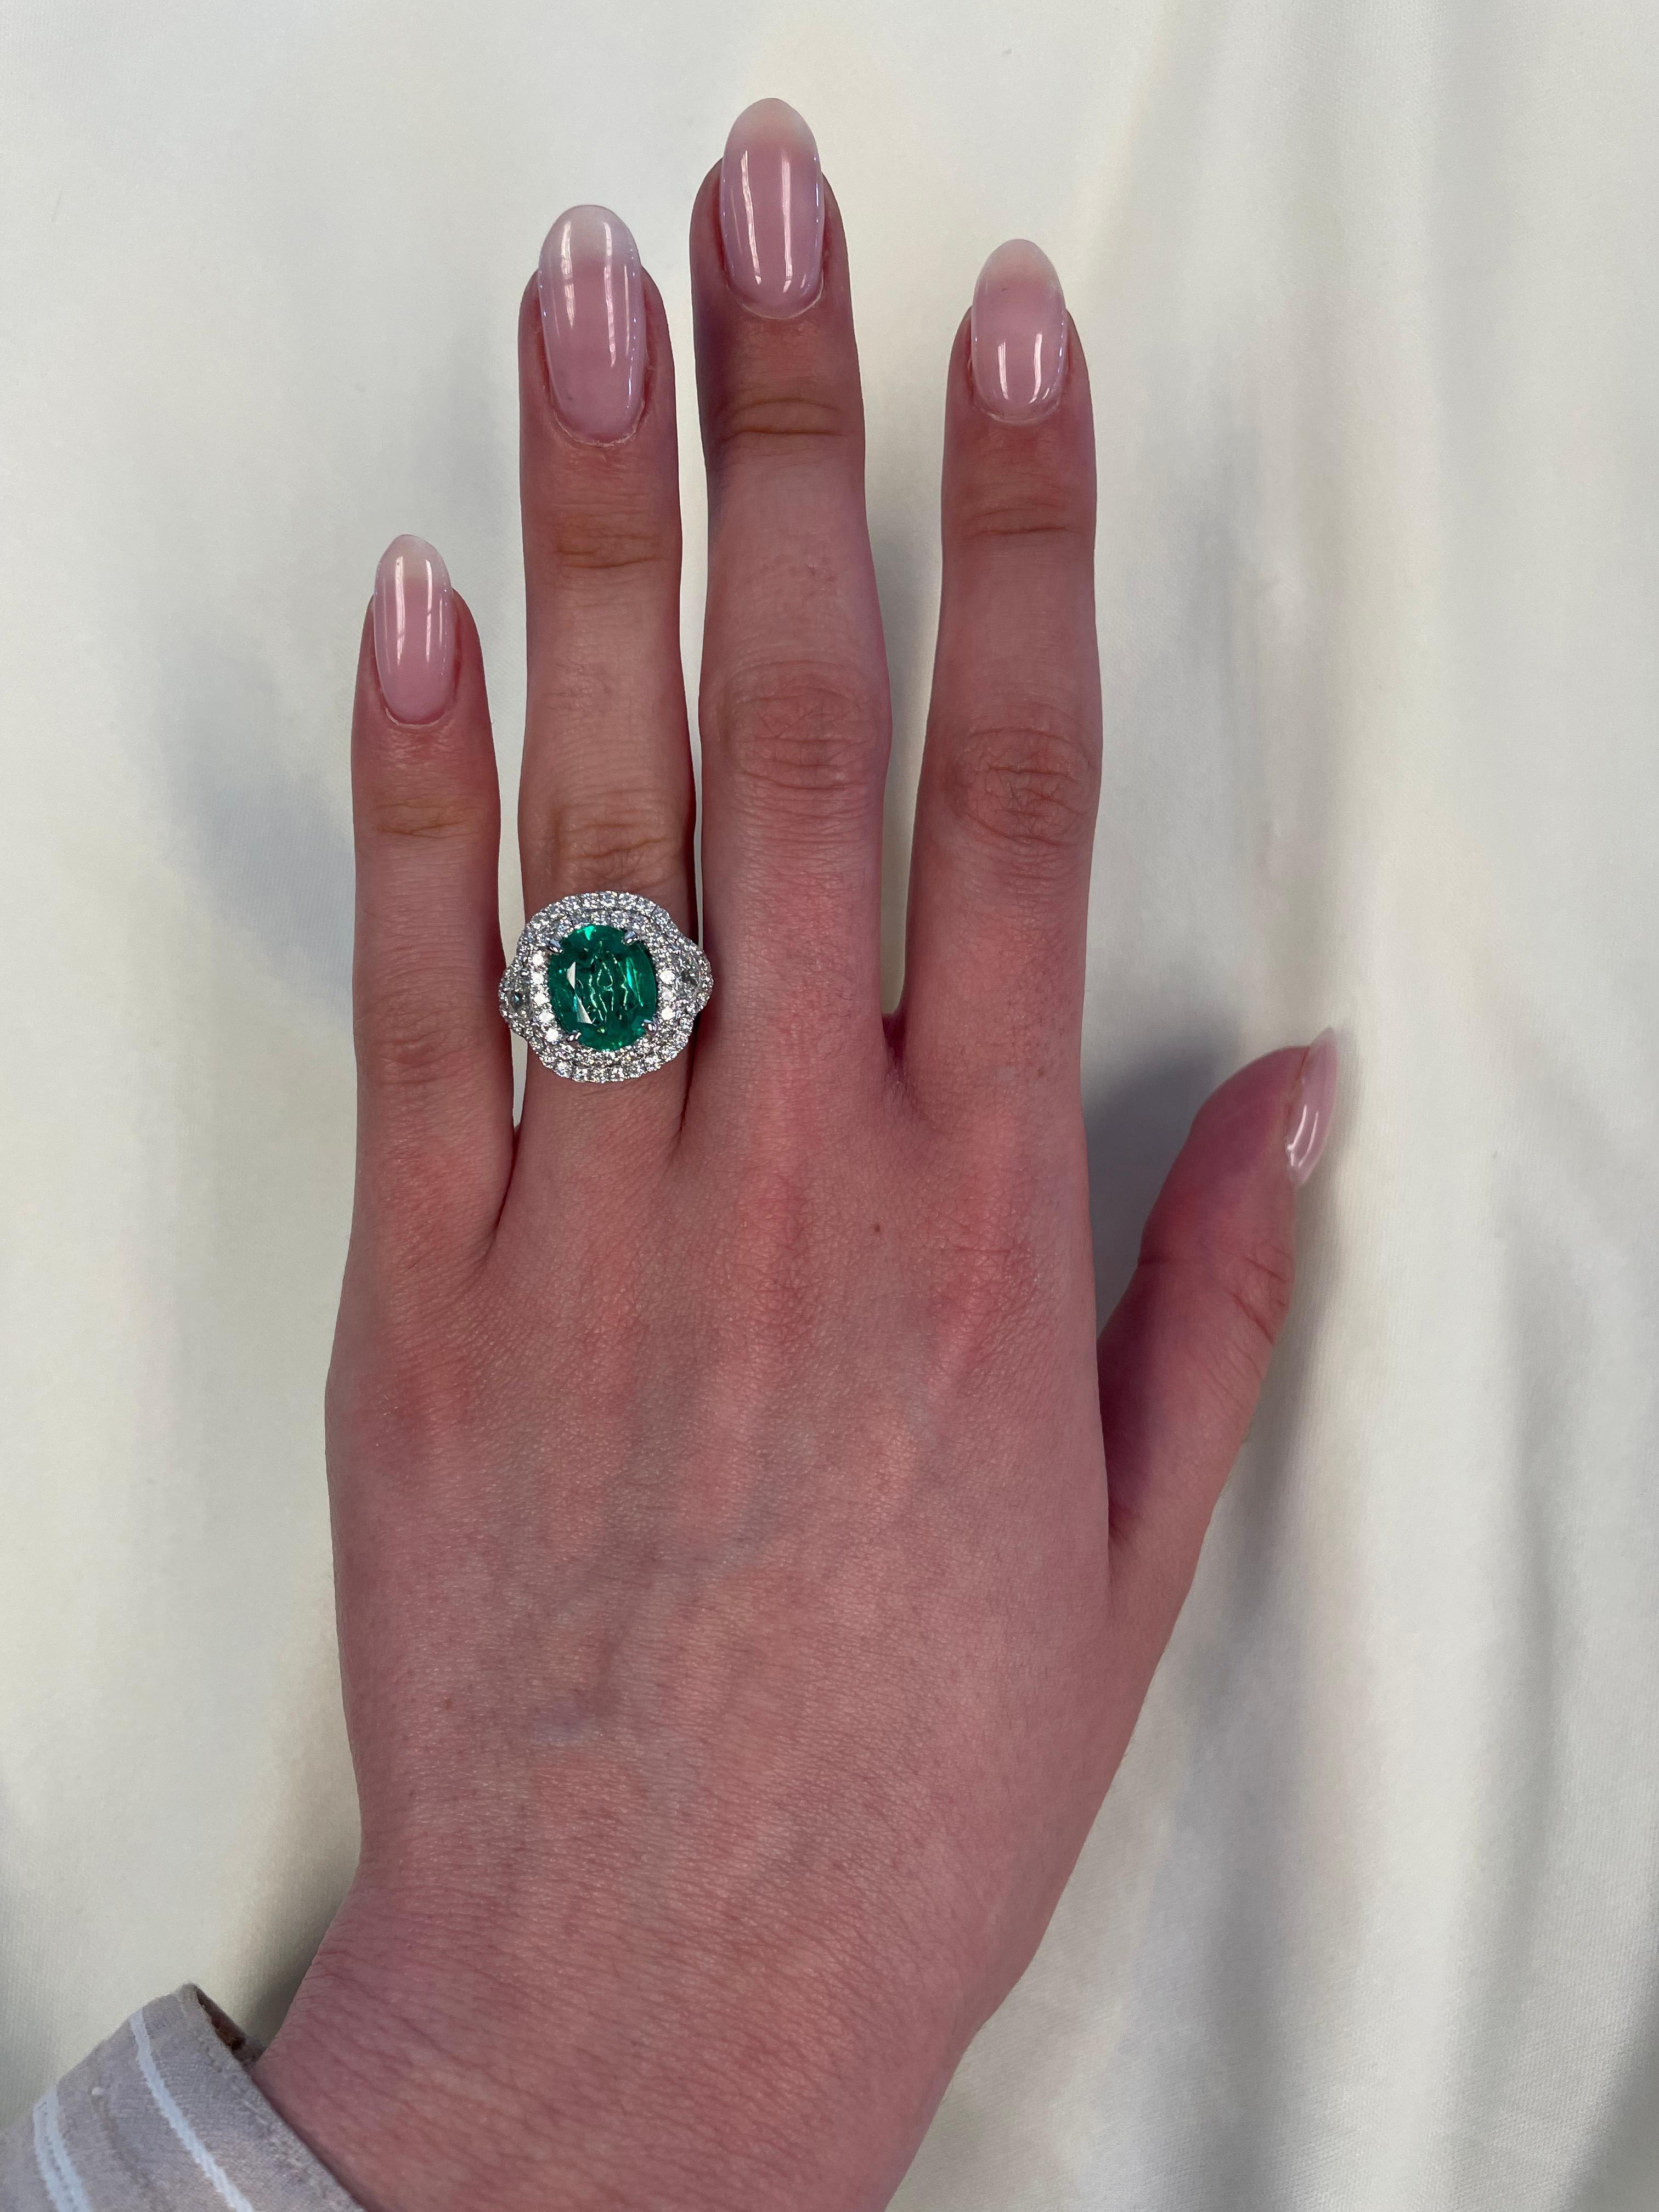 Stunning emerald and diamond three stone ring with halo. By Alexander of Beverly Hills. 
Superb color.
4.36 carats total gemstone weight.
2.63 carat oval emerald. 2 half moons with round brilliant diamonds, 1.73 carats. Approximately G/H color and